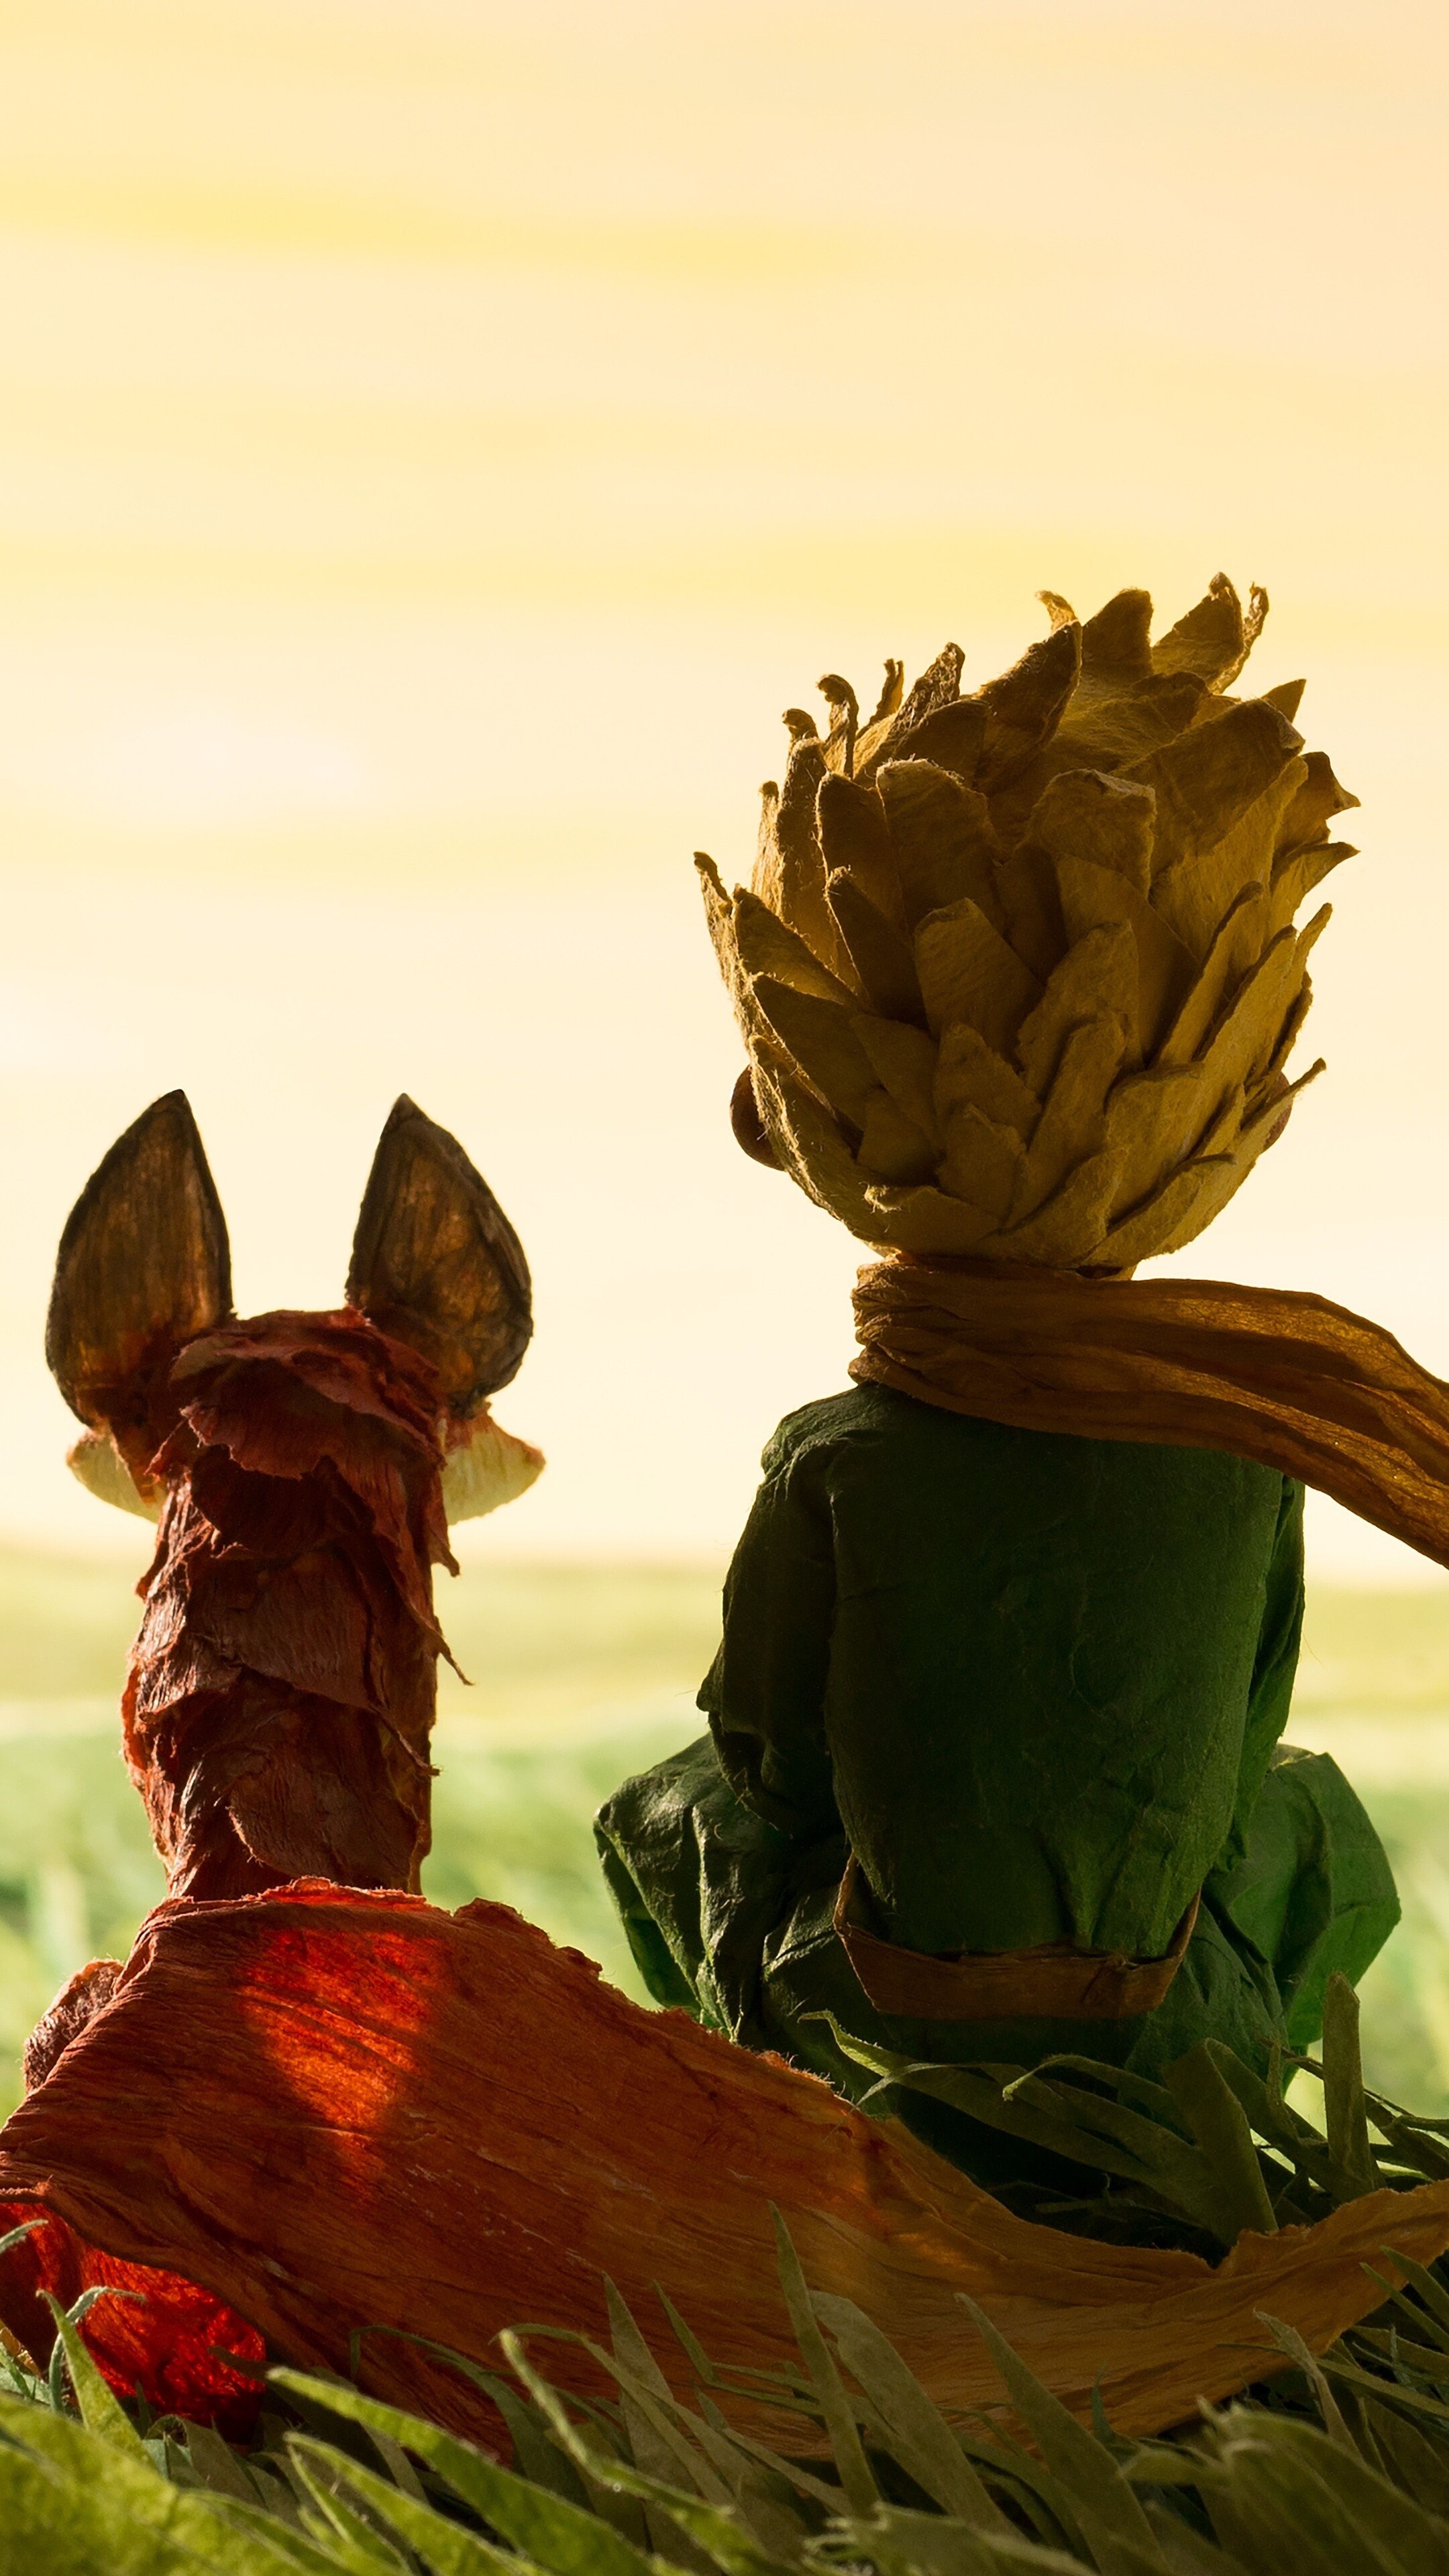 The Little Prince: The story follows a young prince who visits various planets in space, including Earth, and addresses themes of loneliness, friendship, love, and loss. 2160x3840 4K Wallpaper.